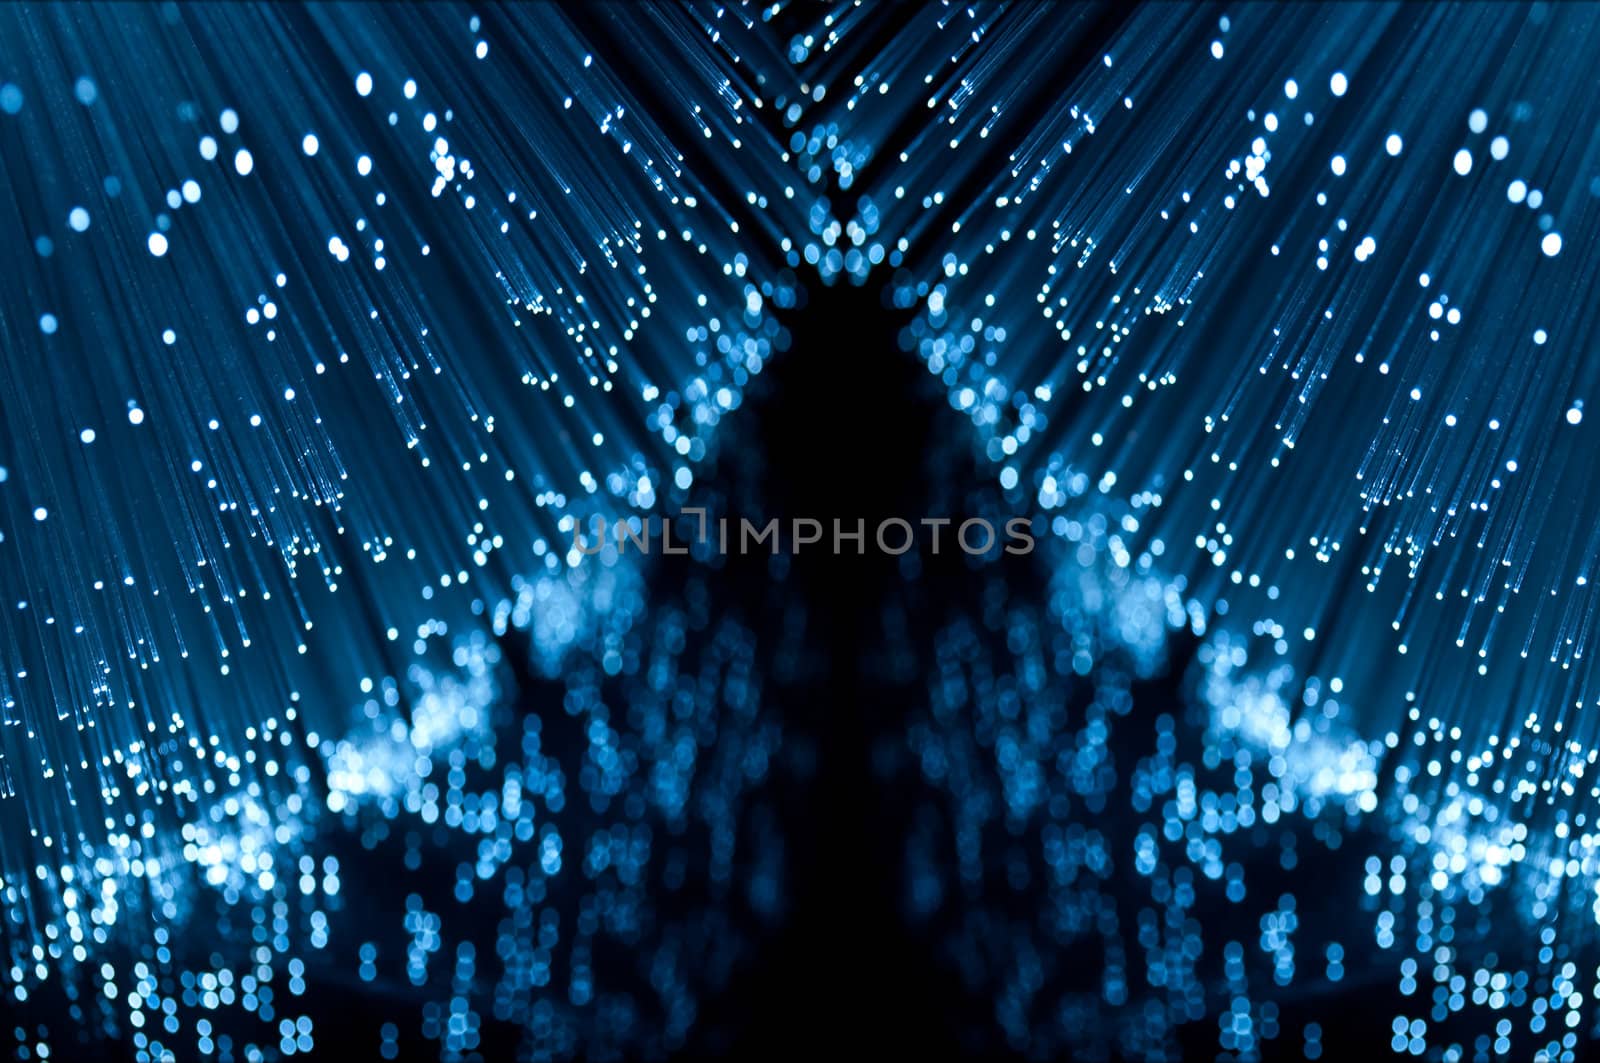 Close up and low level capturing the ends of many illuminated fibre optic light strands reflecting into the foreground.